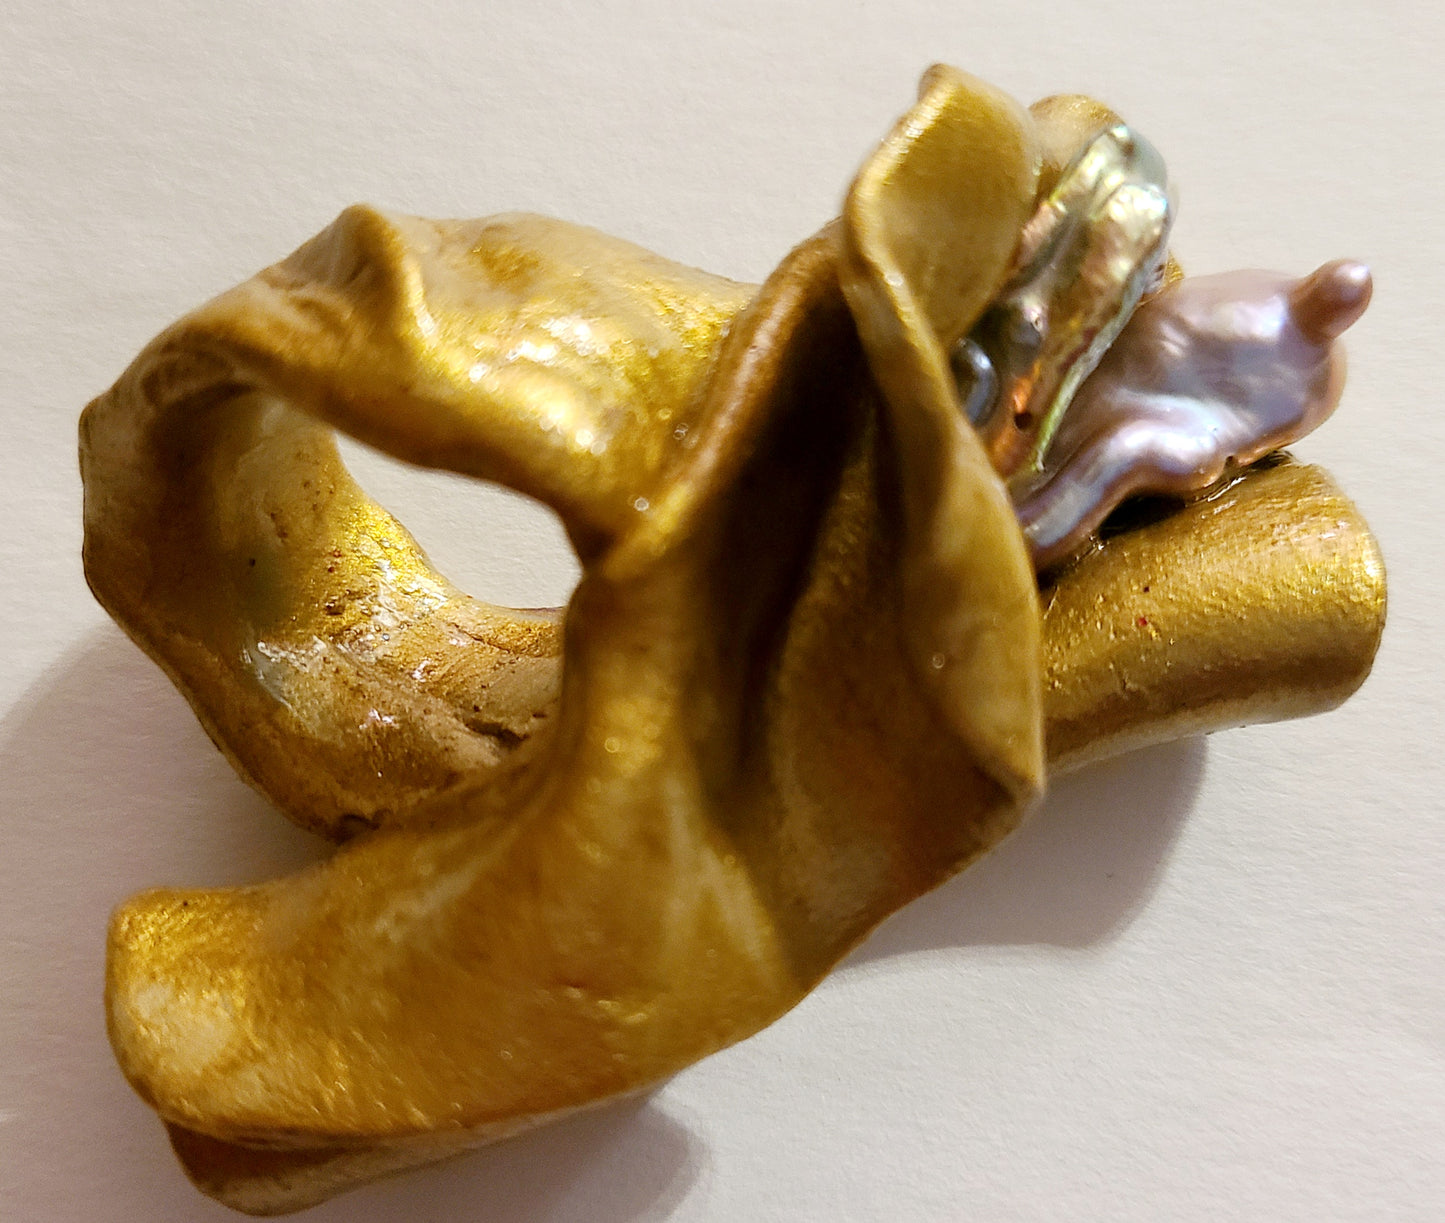 Gold Metallic Hand Sculpted Freshwater Pearl Statement Ring Size 7,  Sensuous Organic Yoni Ring, OOAK Wearable Art Finger Candy